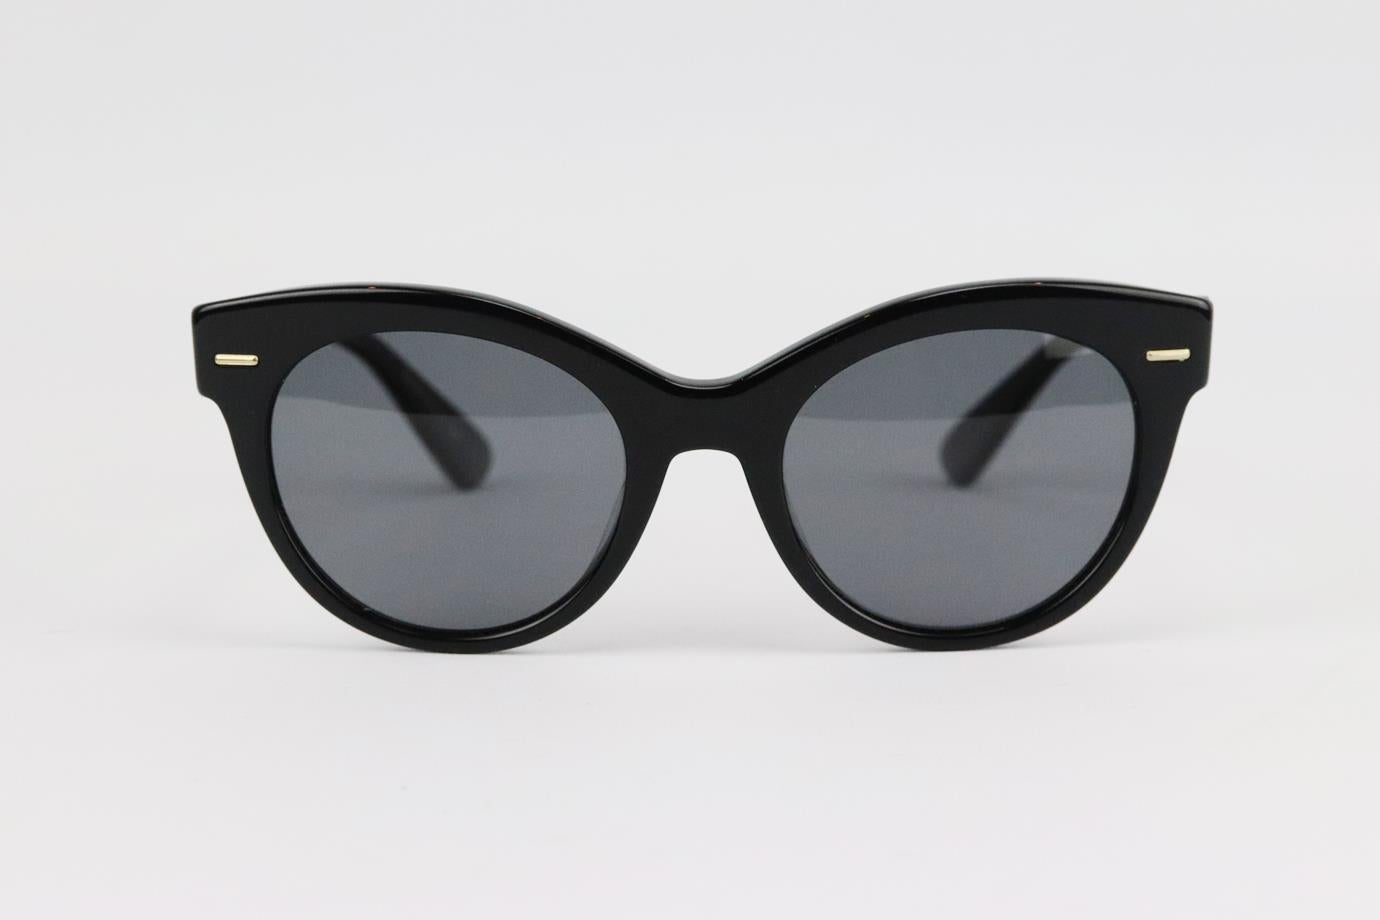 The Row + Oliver Peoples round frame acetate sunglasses. Black. Comes with case. Style code: OV5421SU 100581. Lens size: 53 mm. Arm size: 145 mm. Bridge size: 21 mm
